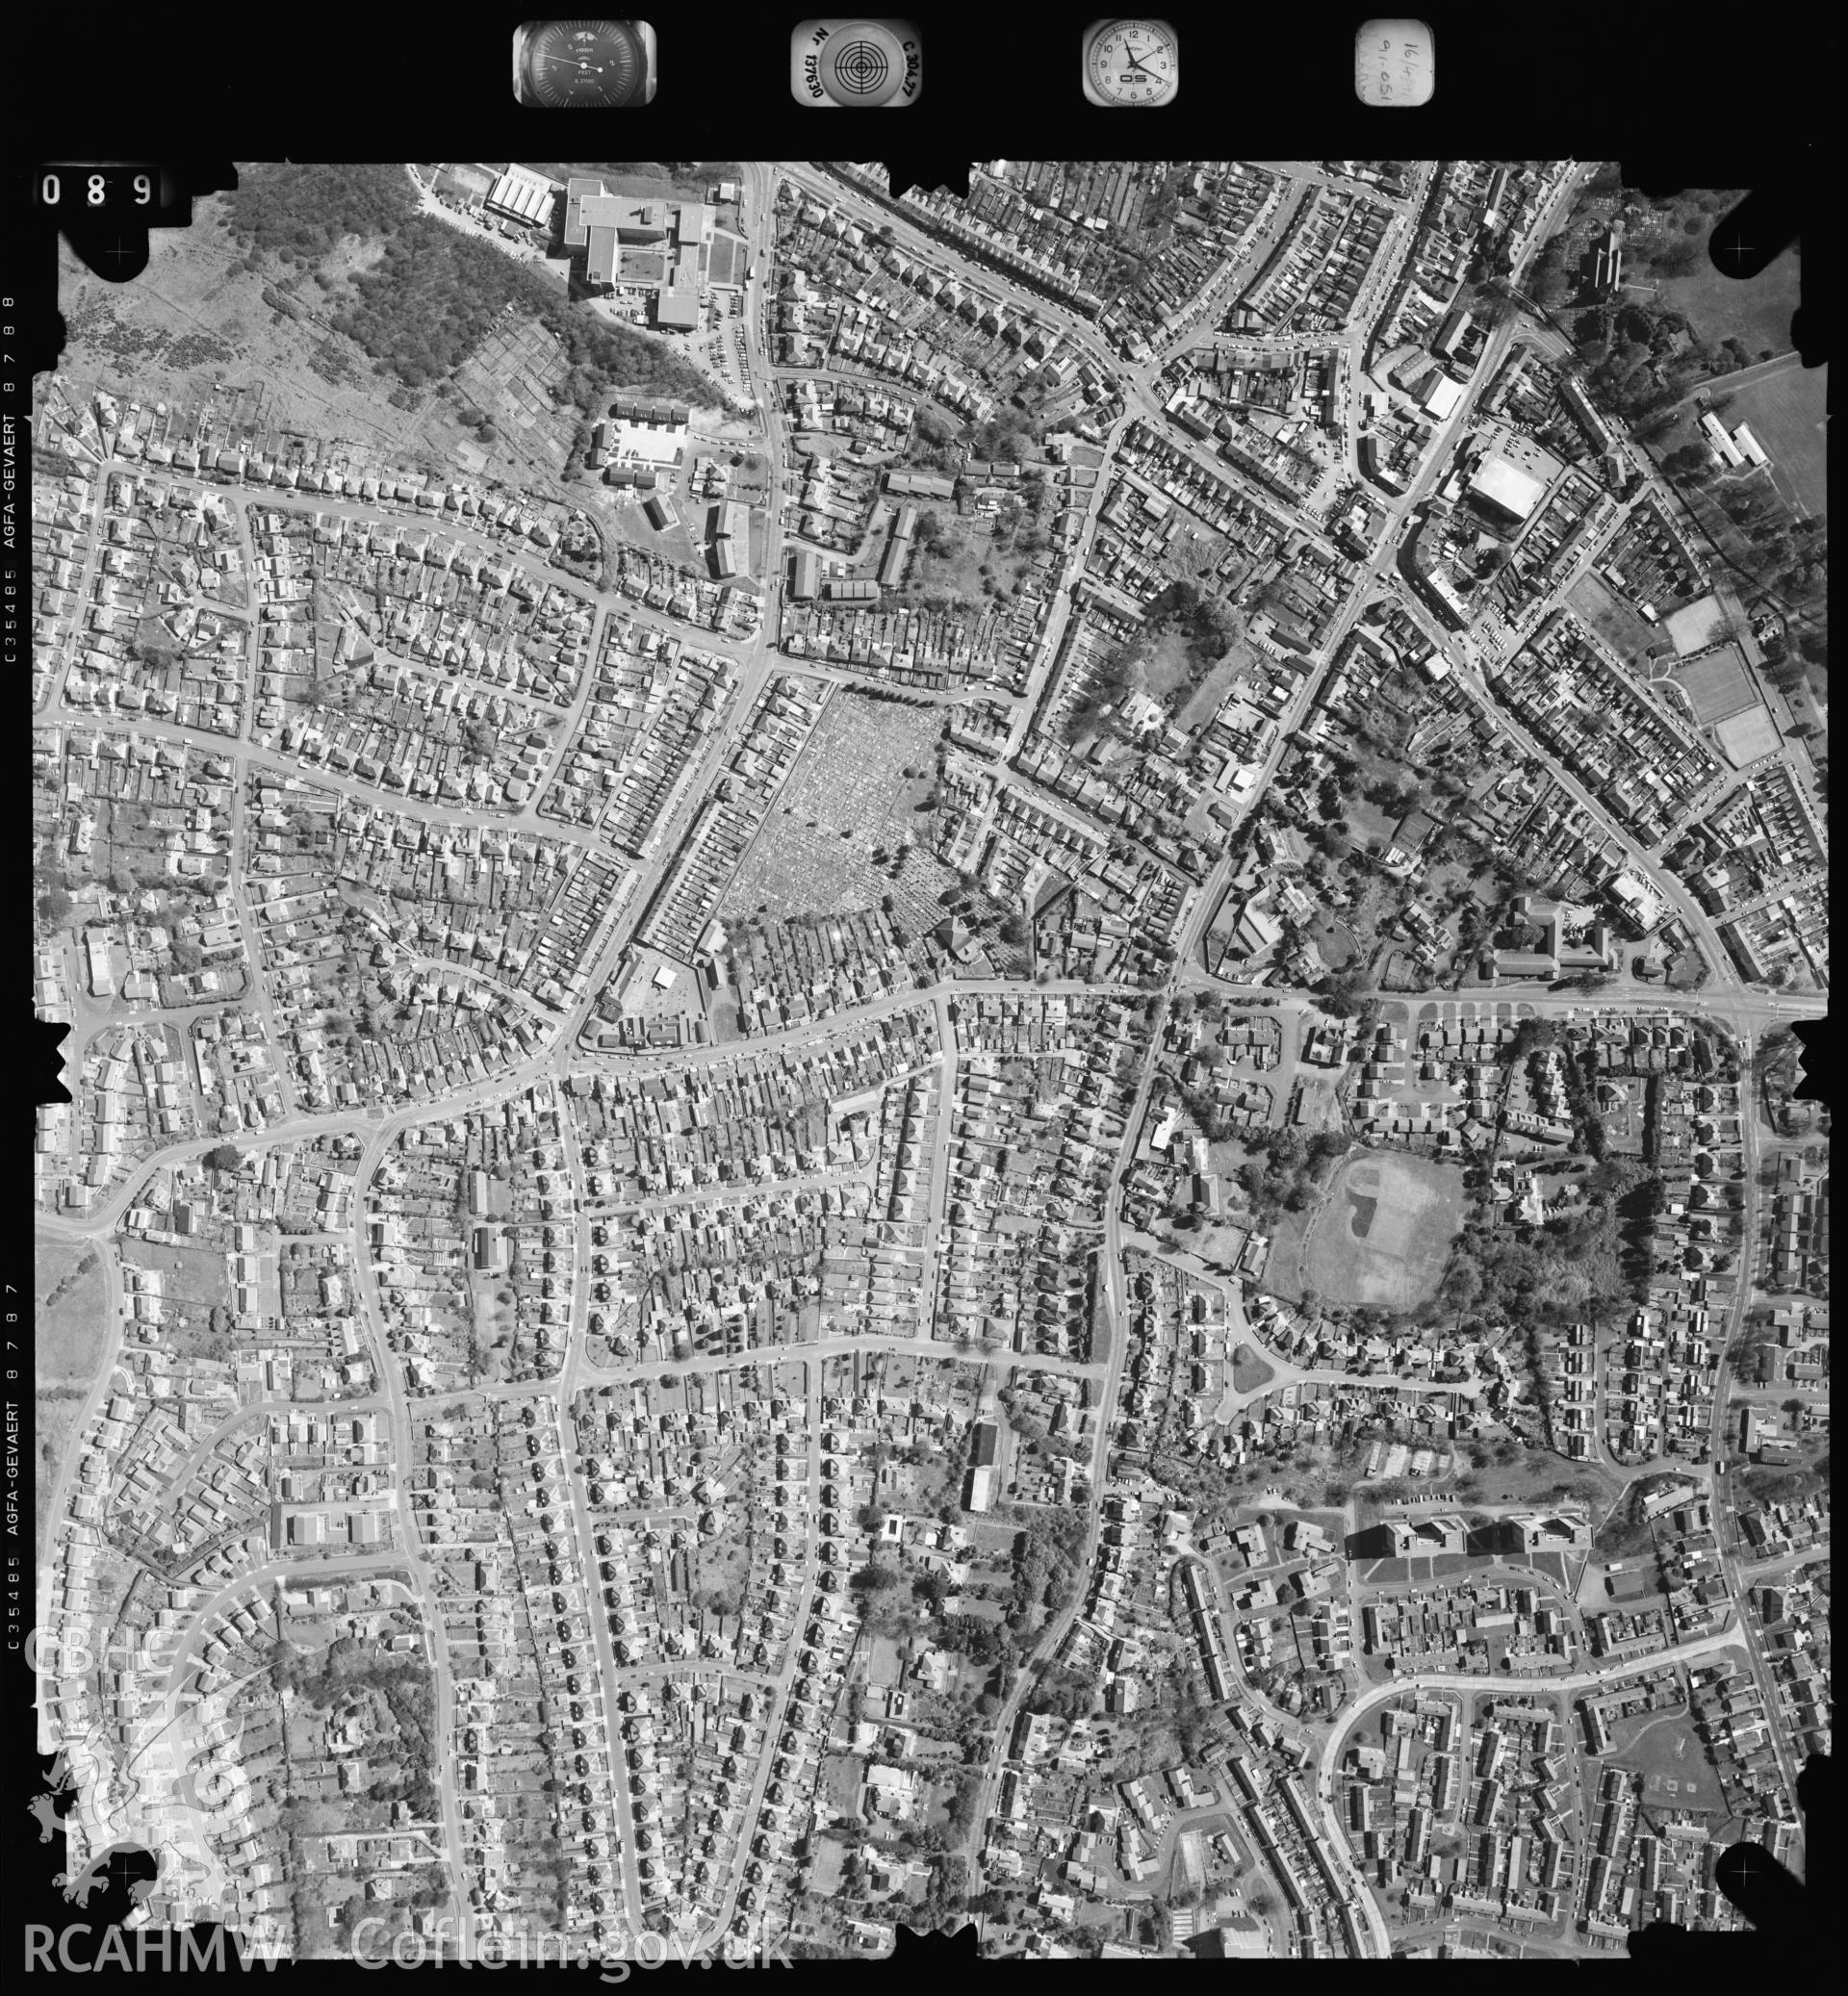 Digitized copy of an aerial photograph showing the Sketty area of Swansea, taken by Ordnance Survey, 1991.